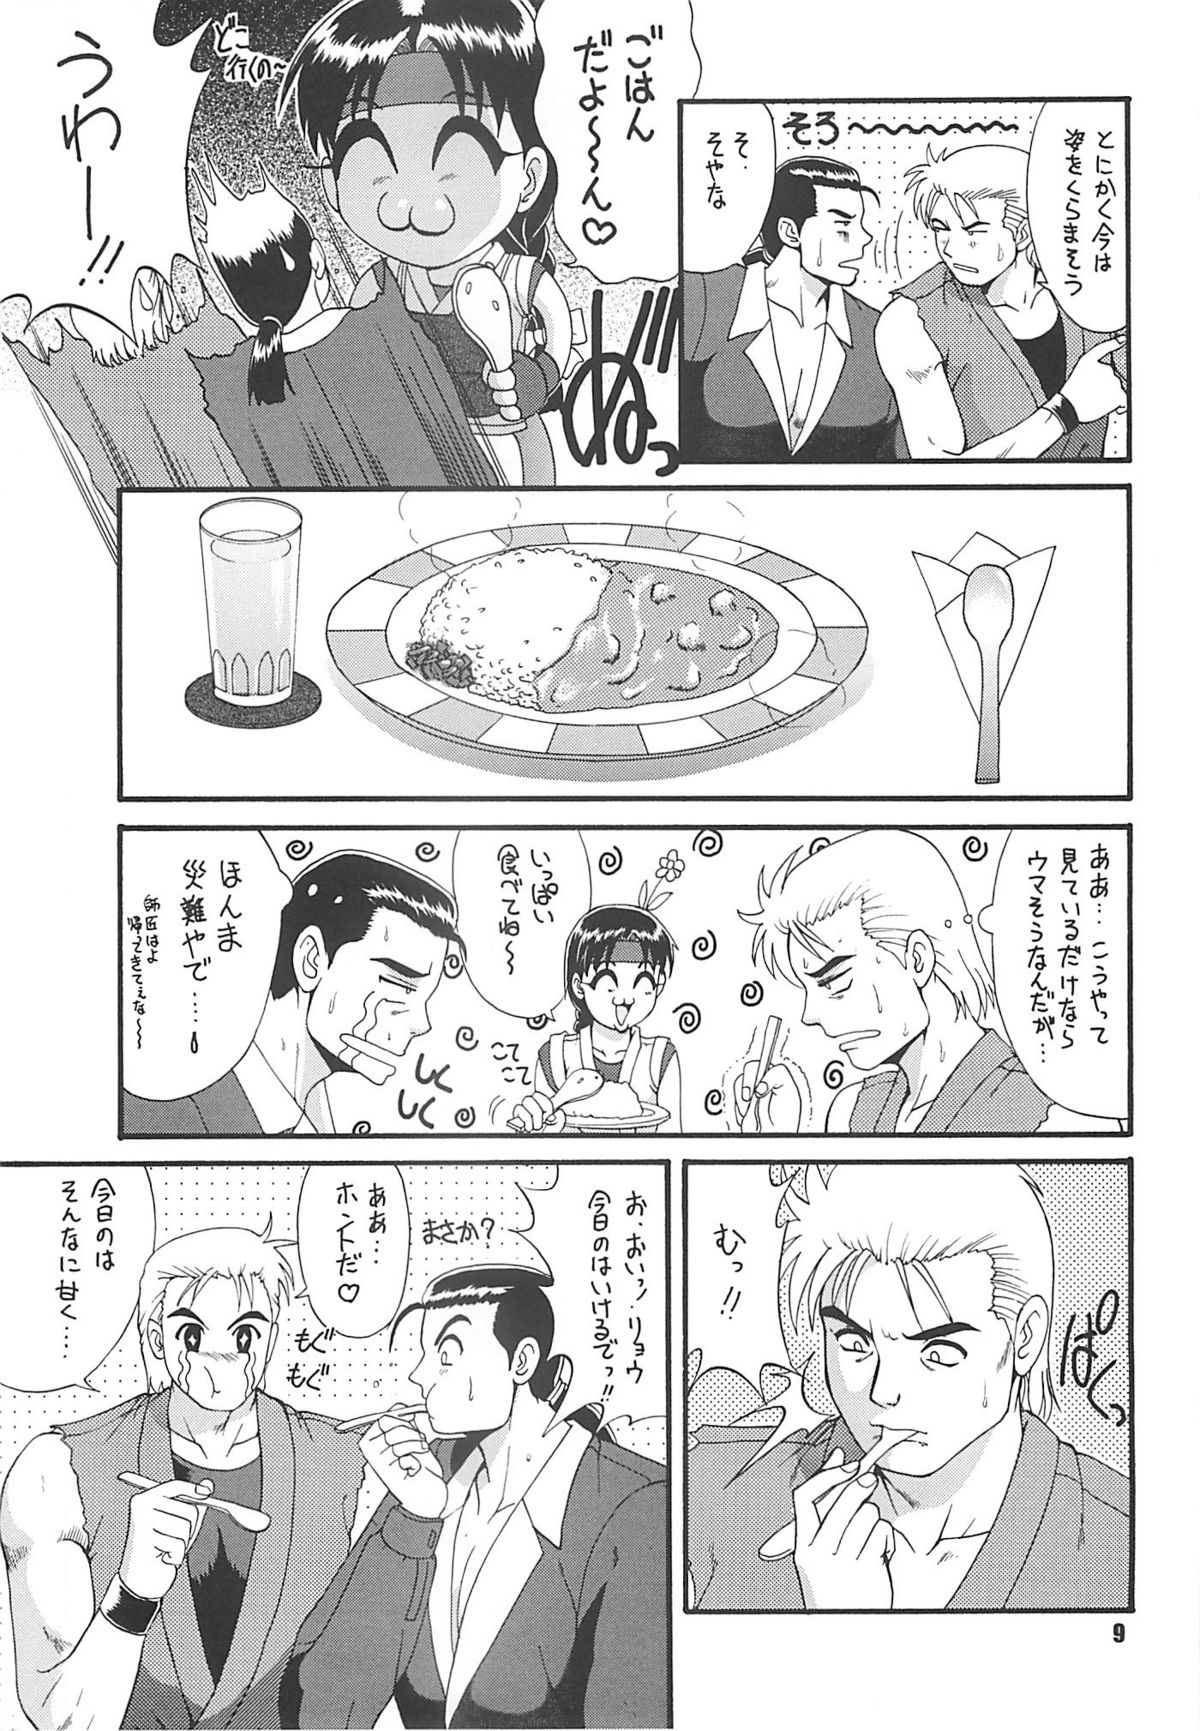 (CR22) [Saigado (Ishoku Dougen)] The Yuri & Friends '97 (King of Fighters) page 8 full